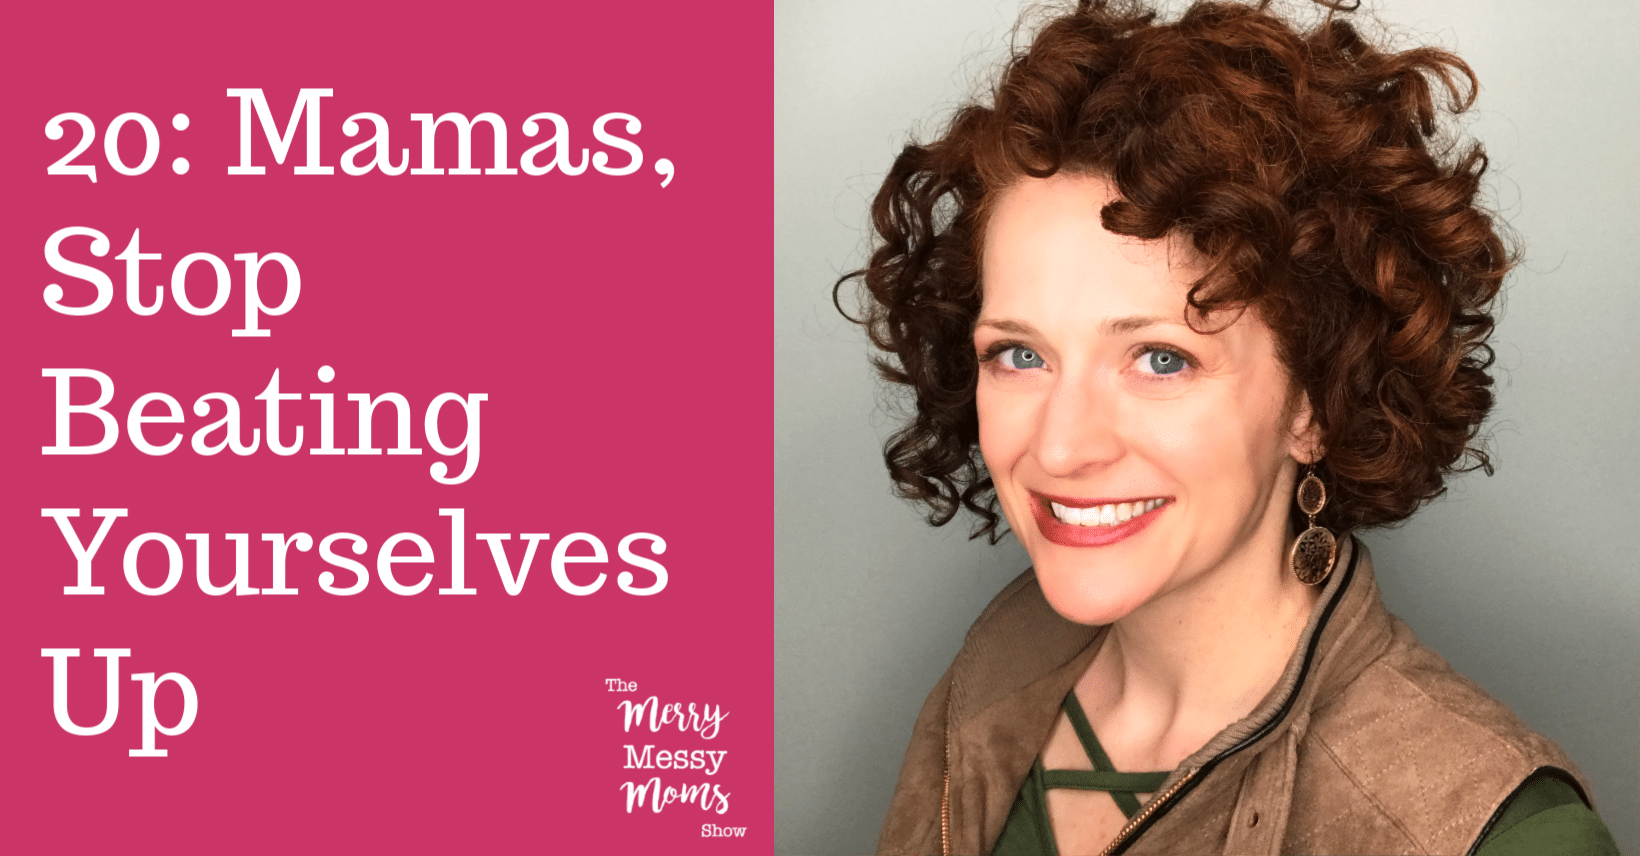 Mamas, Stop Beating Yourselves Up! A pep-talk for mamas to have more self-compassion and less mom guilt